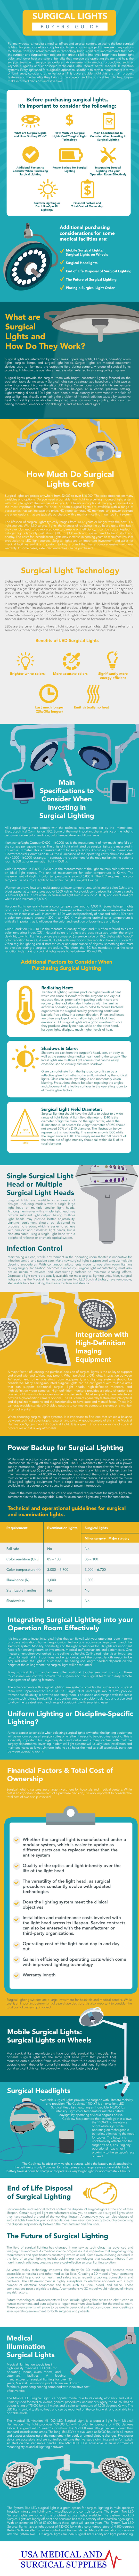 Surgical Light Buyer's Guide for Medical Professionals, Surgical Centers and Medical Offices